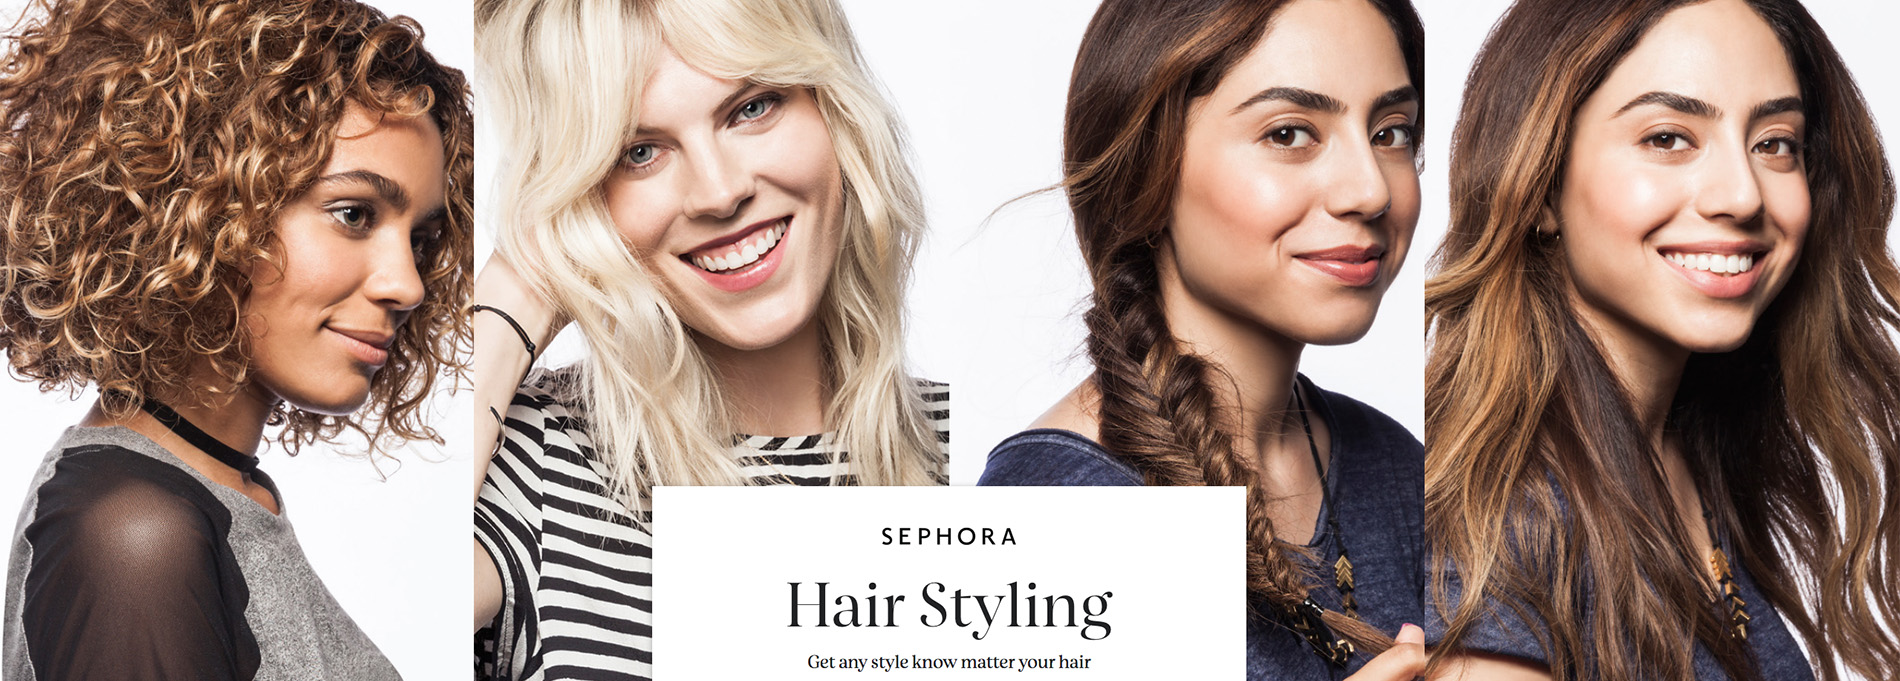 SEPHORA ADDS ANDROID APP AND NEW POCKET HAIR STYLIST TOOL TO ITS  AWARD-WINNING MOBILE PLATFORMS